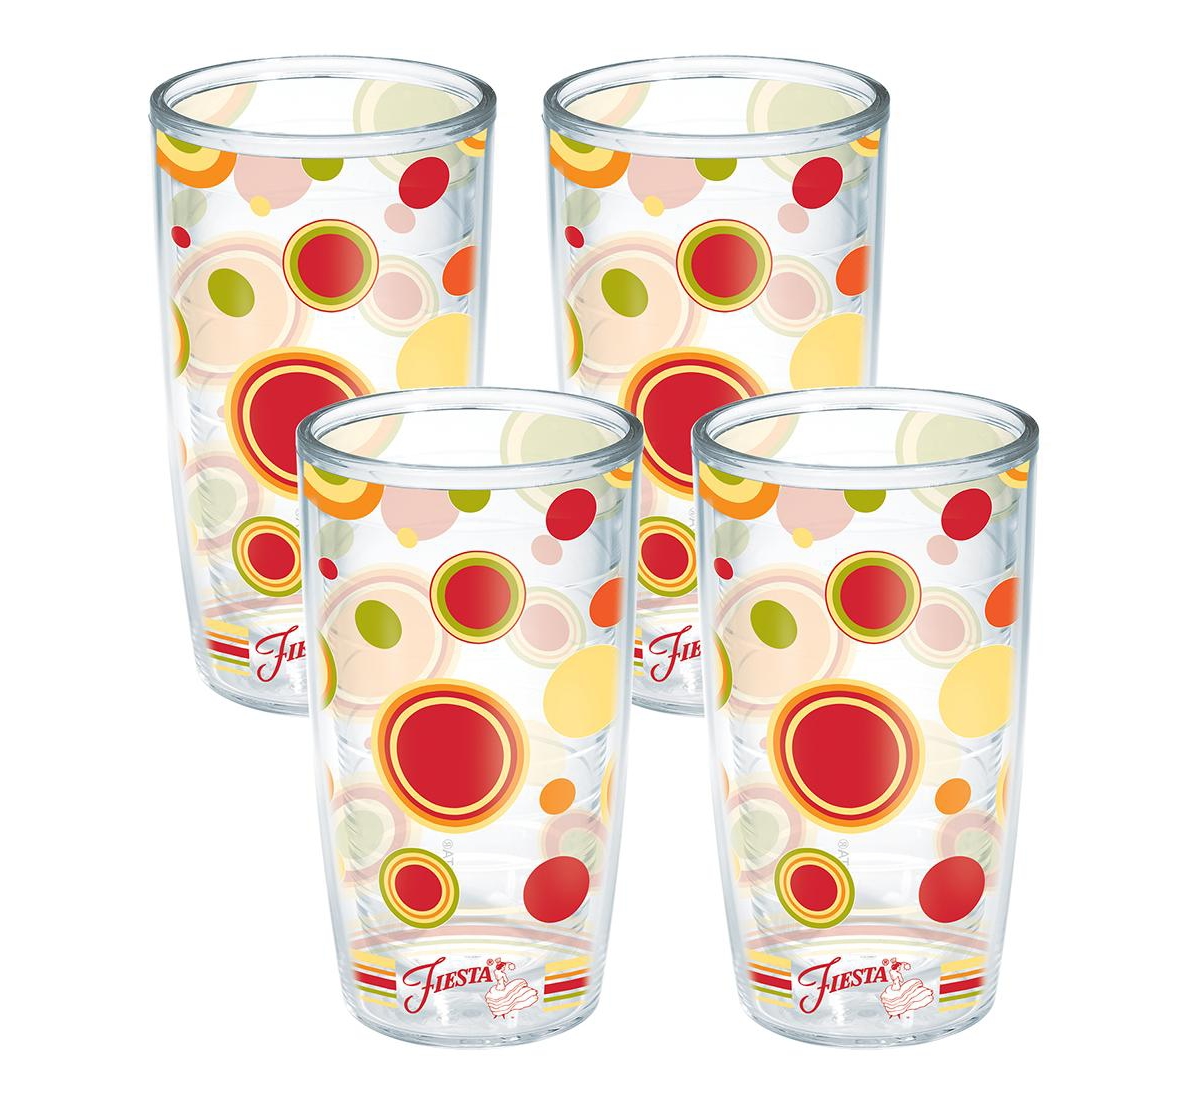 Tervis Tumbler Tervis Fiesta Sunny Dots Made In Usa Double Walled Insulated Tumbler Cup Keeps Drinks Cold & Hot, 16 In Open Miscellaneous